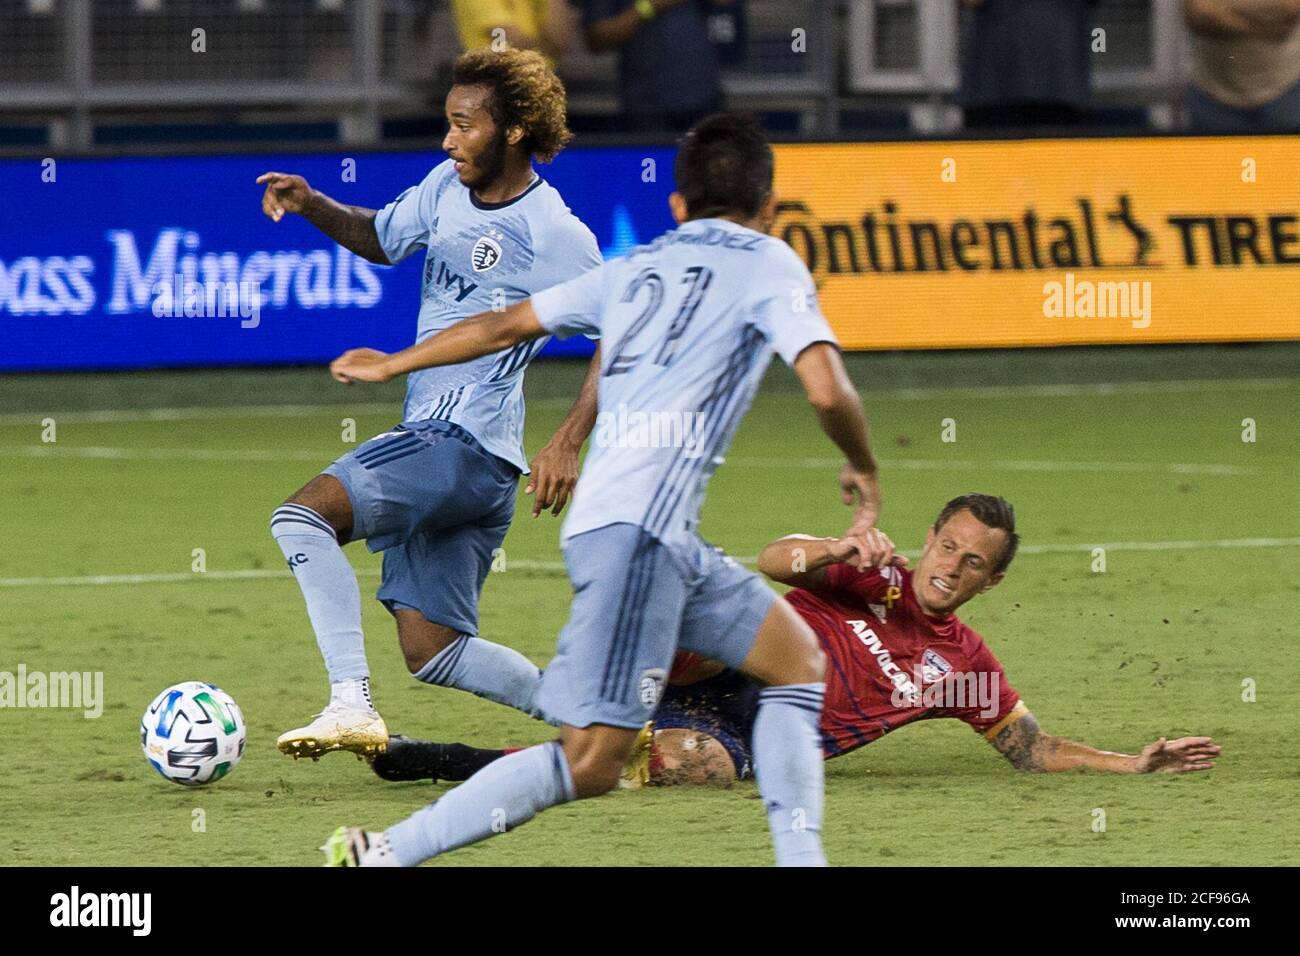 September 2, 2020, Kansas City, Kansas, U.S: Sporting KC midfielder/forward Gianluca Busio #27 (l) pushes through the defensive tackle of FC Dallas defender Reto Ziegler #3 (r) during the second half of the game. (Credit Image: © Serena S.Y. Hsu/ZUMA Wire) Stock Photo